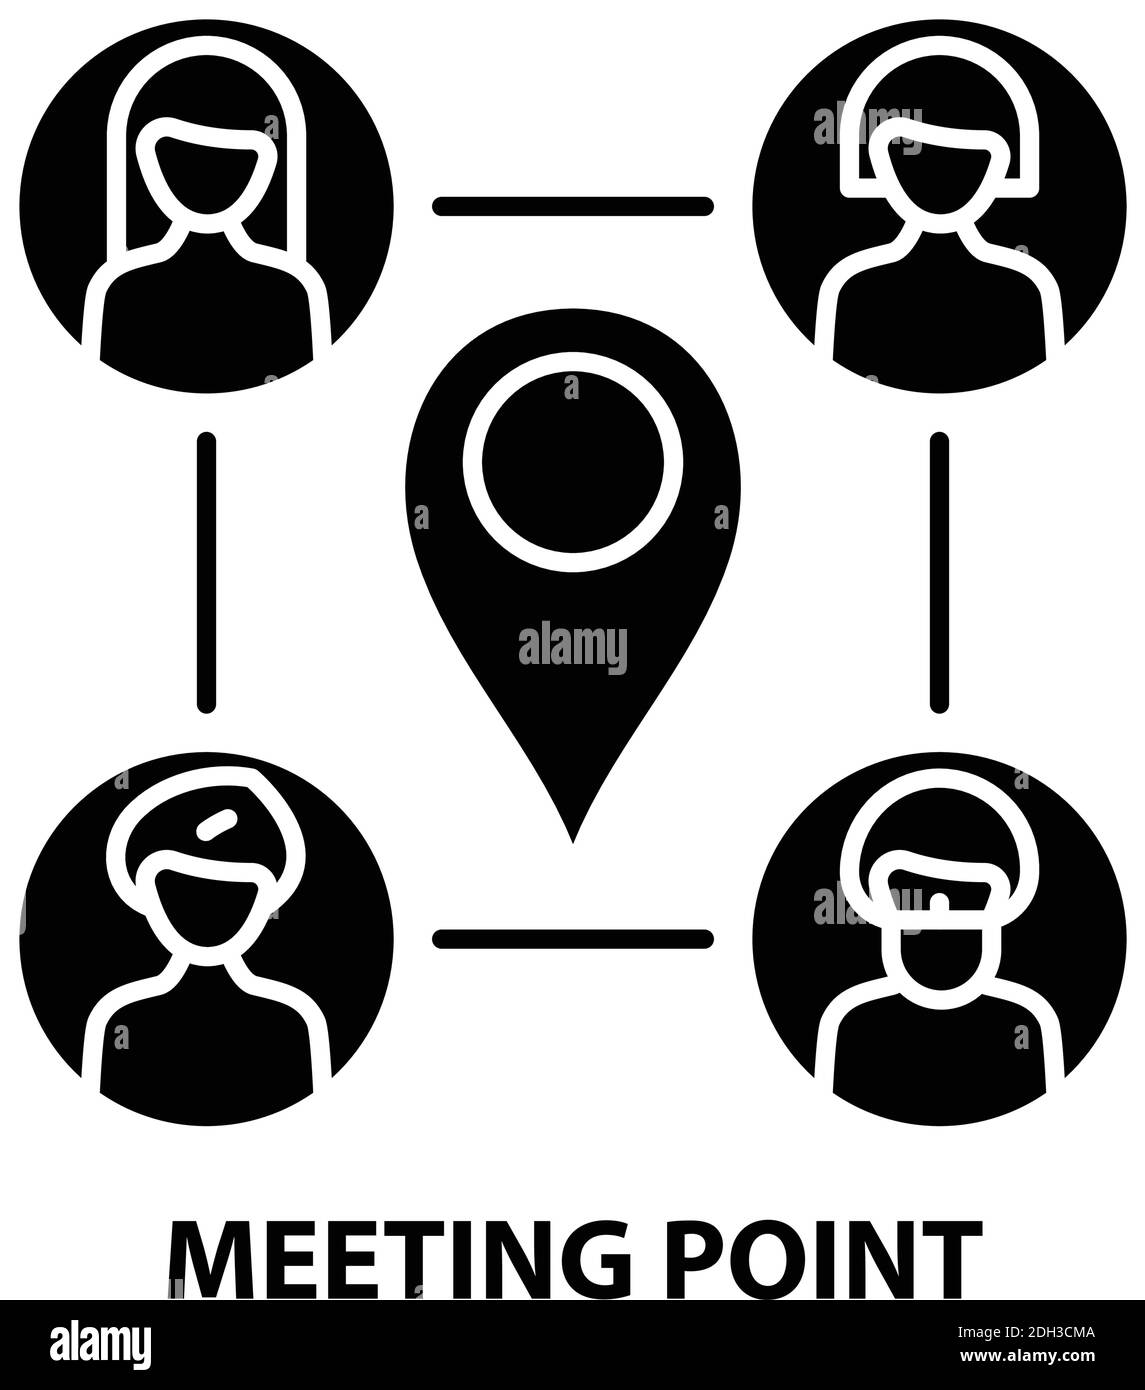 meeting point icon, black vector sign with editable strokes, concept illustration Stock Vector